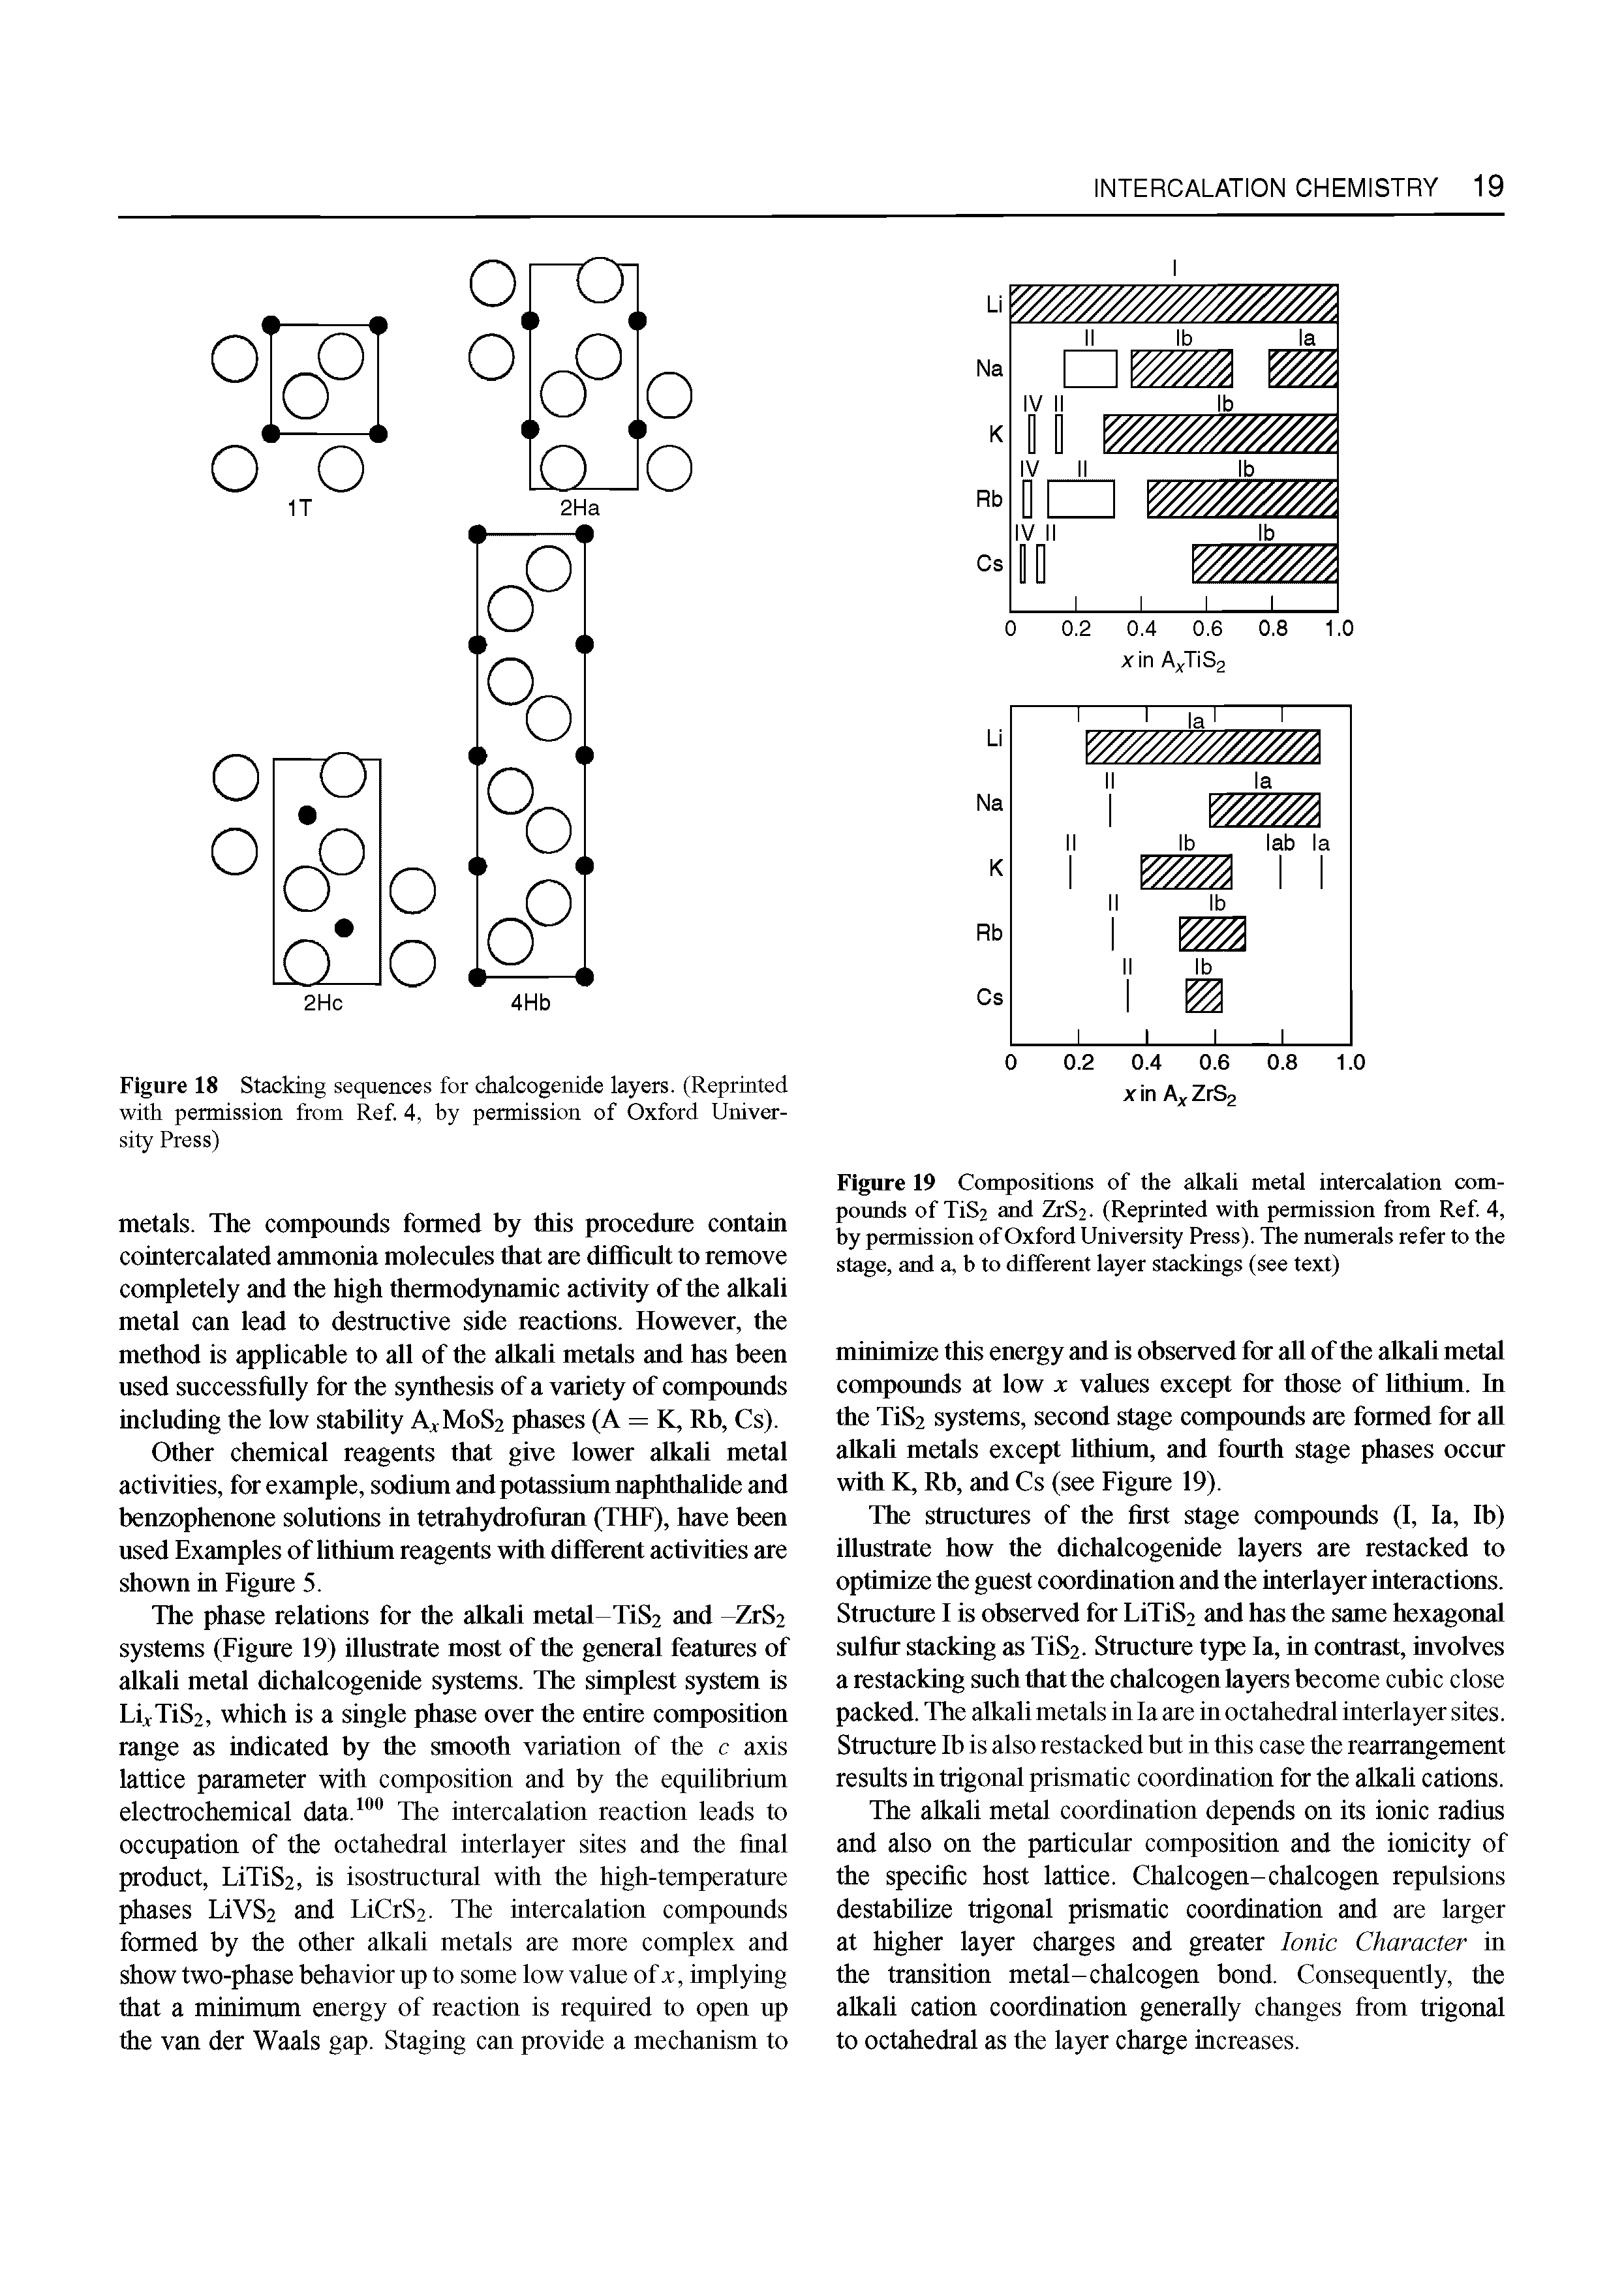 Figure 19 Compositions of the alkali metal intercalation com-poimds of TiS2 and ZrS2. (Reprinted with permission from Ref. 4, by permission of Oxford University Press). The numerals refer to the stage, and a, b to different layer stackings (see text)...